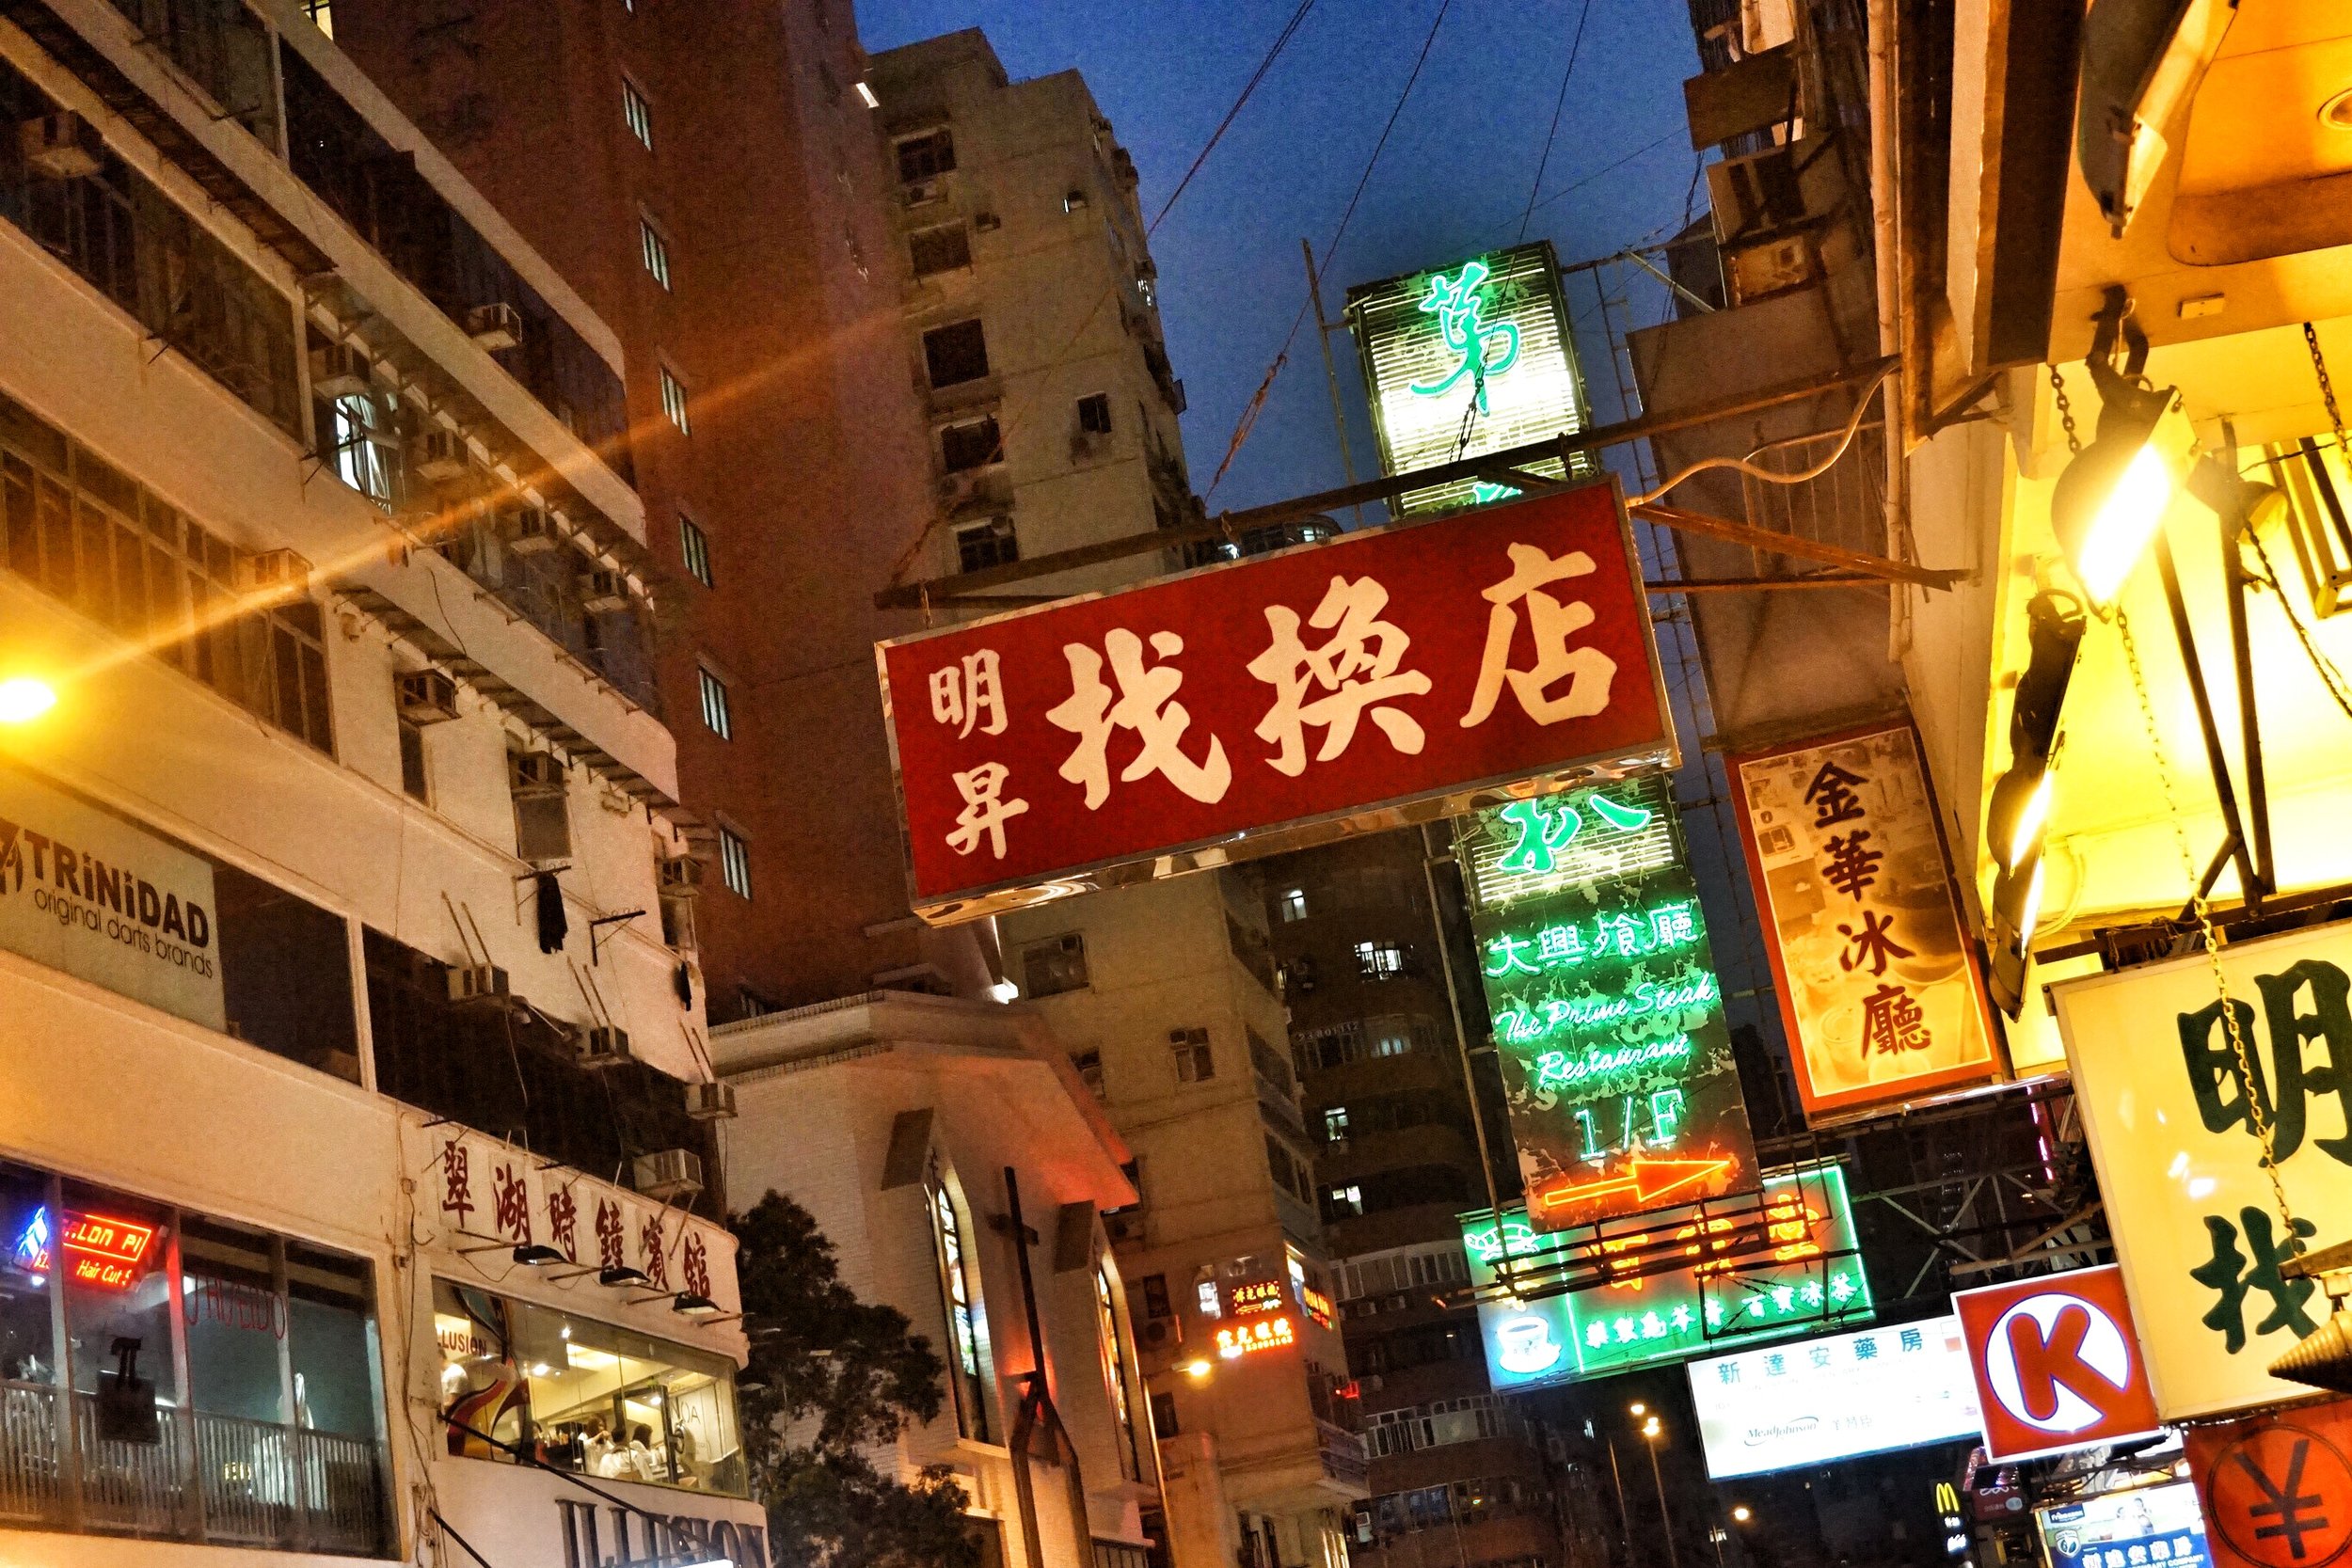 At night Hong Kong truly comes to life and the best way to see it is on a walking tour of the city. A night tour is a great way to soak up the atmosphere of the city at night in the comfort of a small group tour environment.